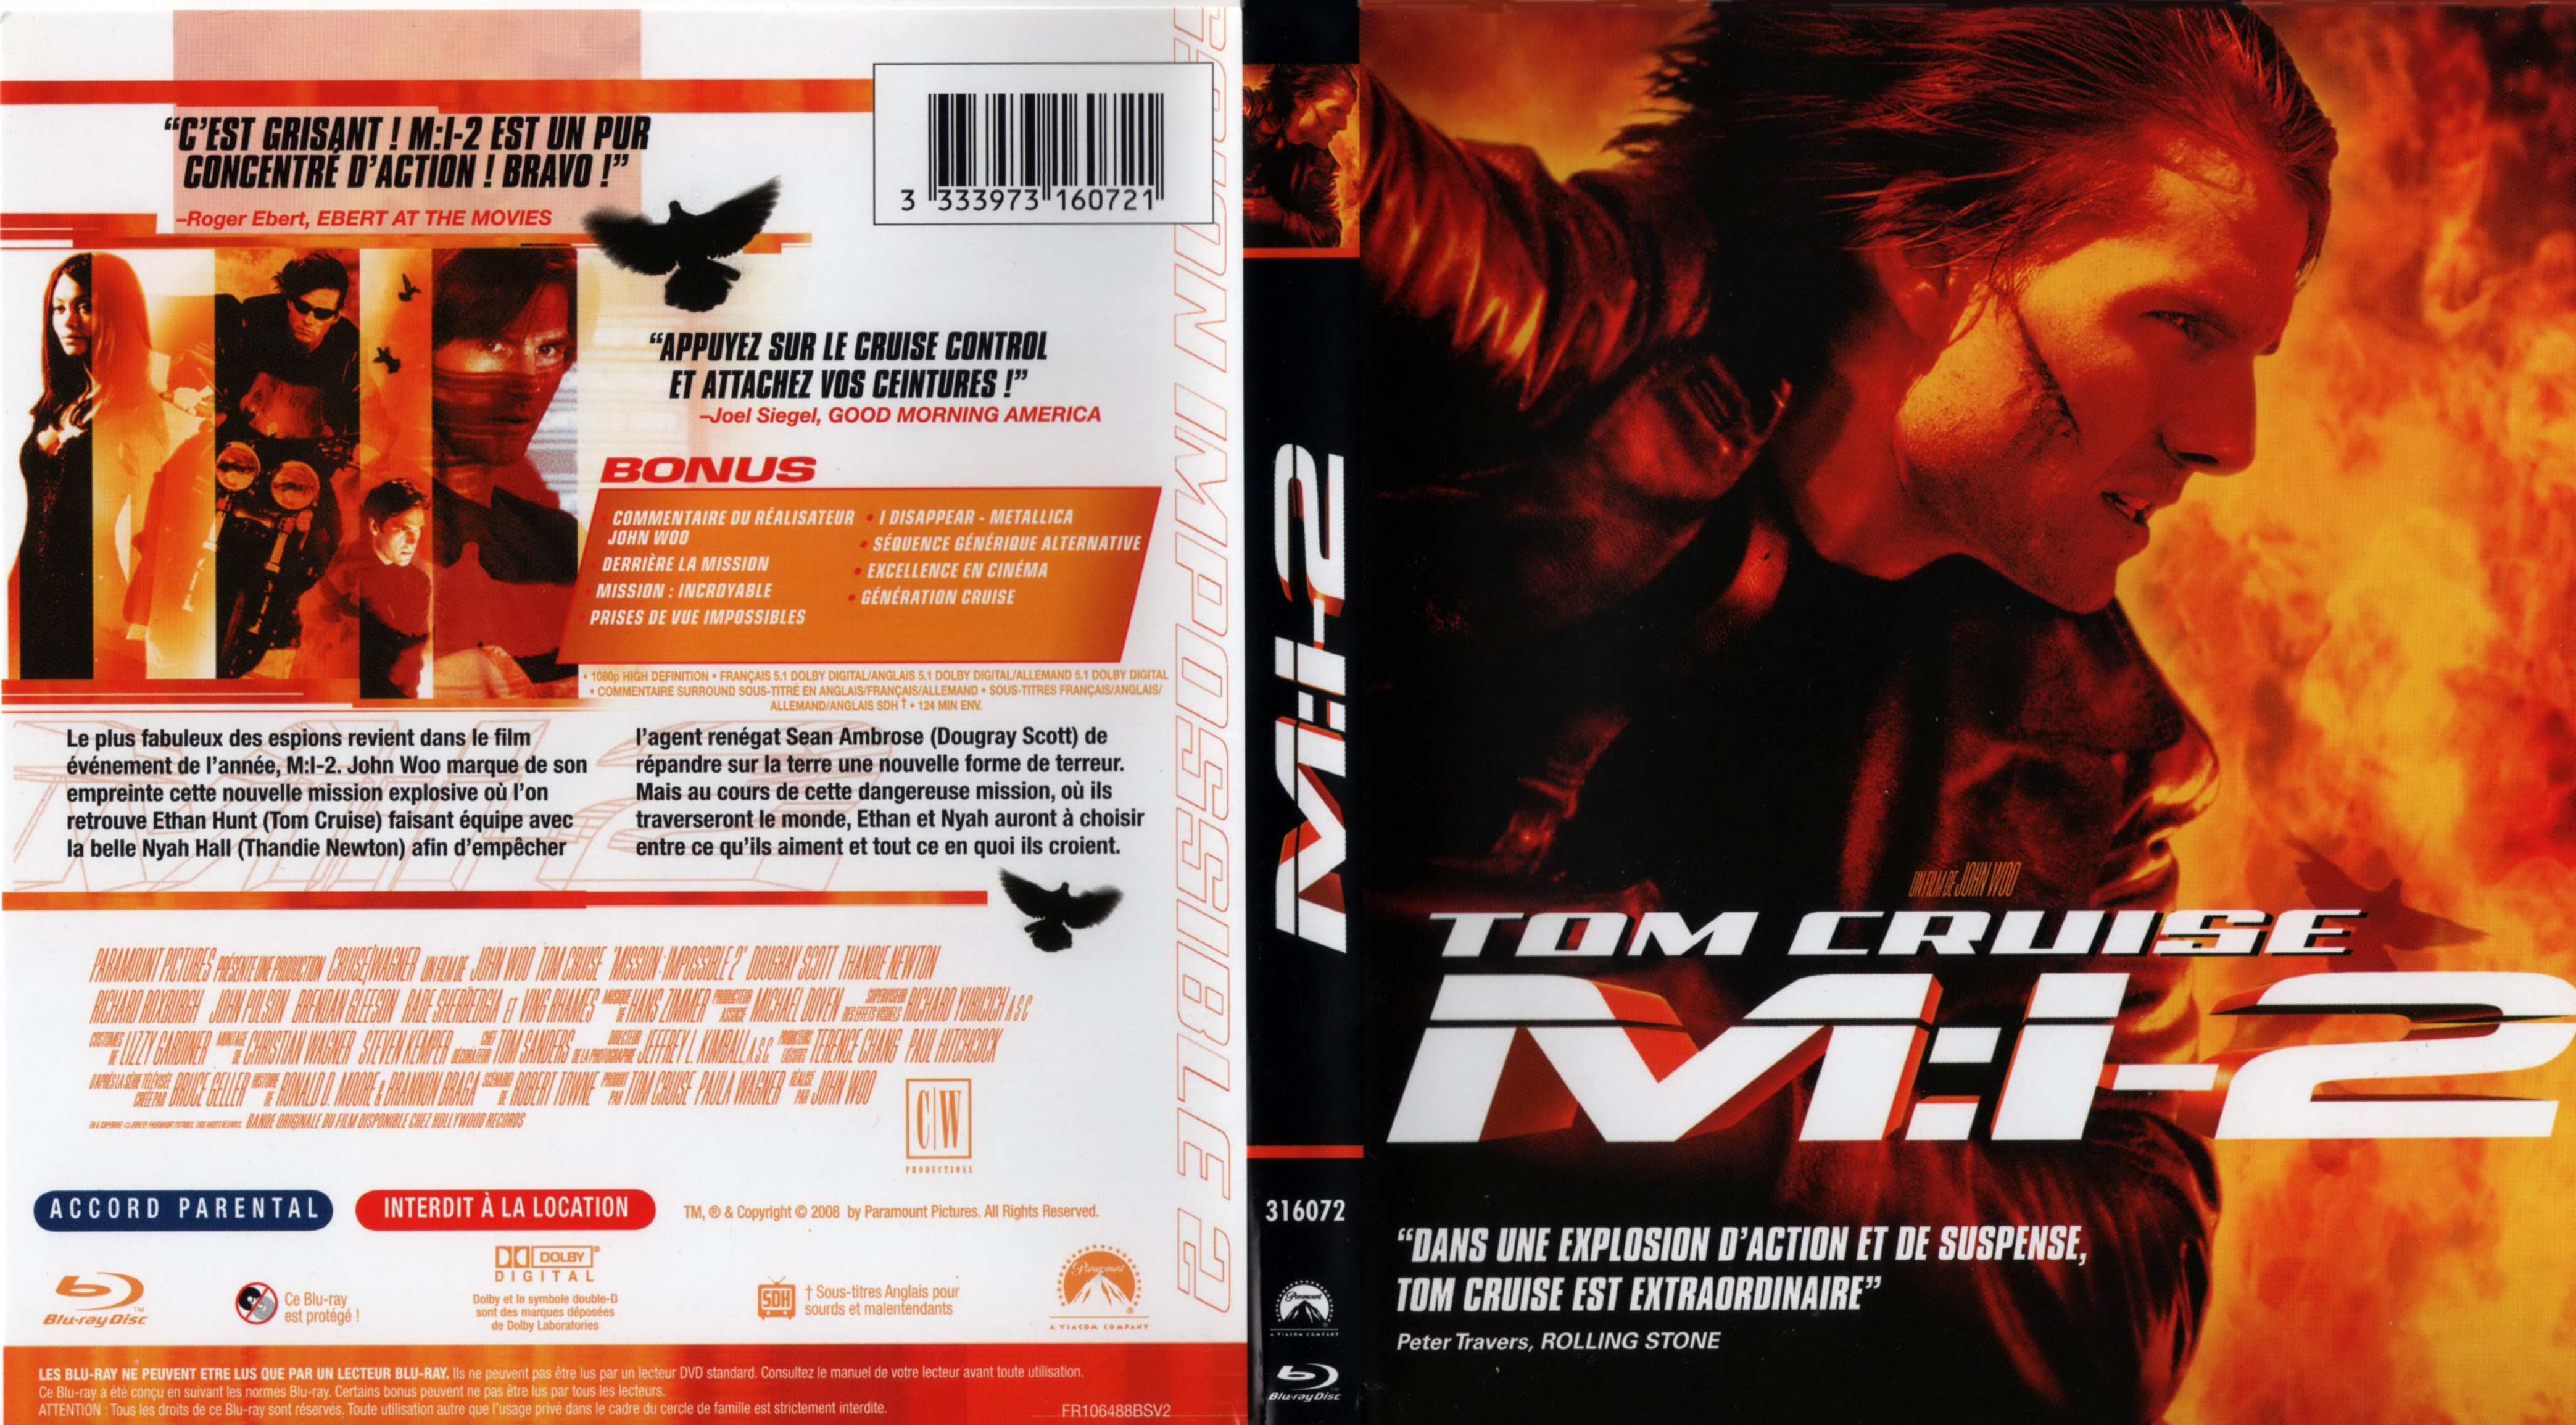 Jaquette DVD Mission impossible 2 (BLU-RAY) v2